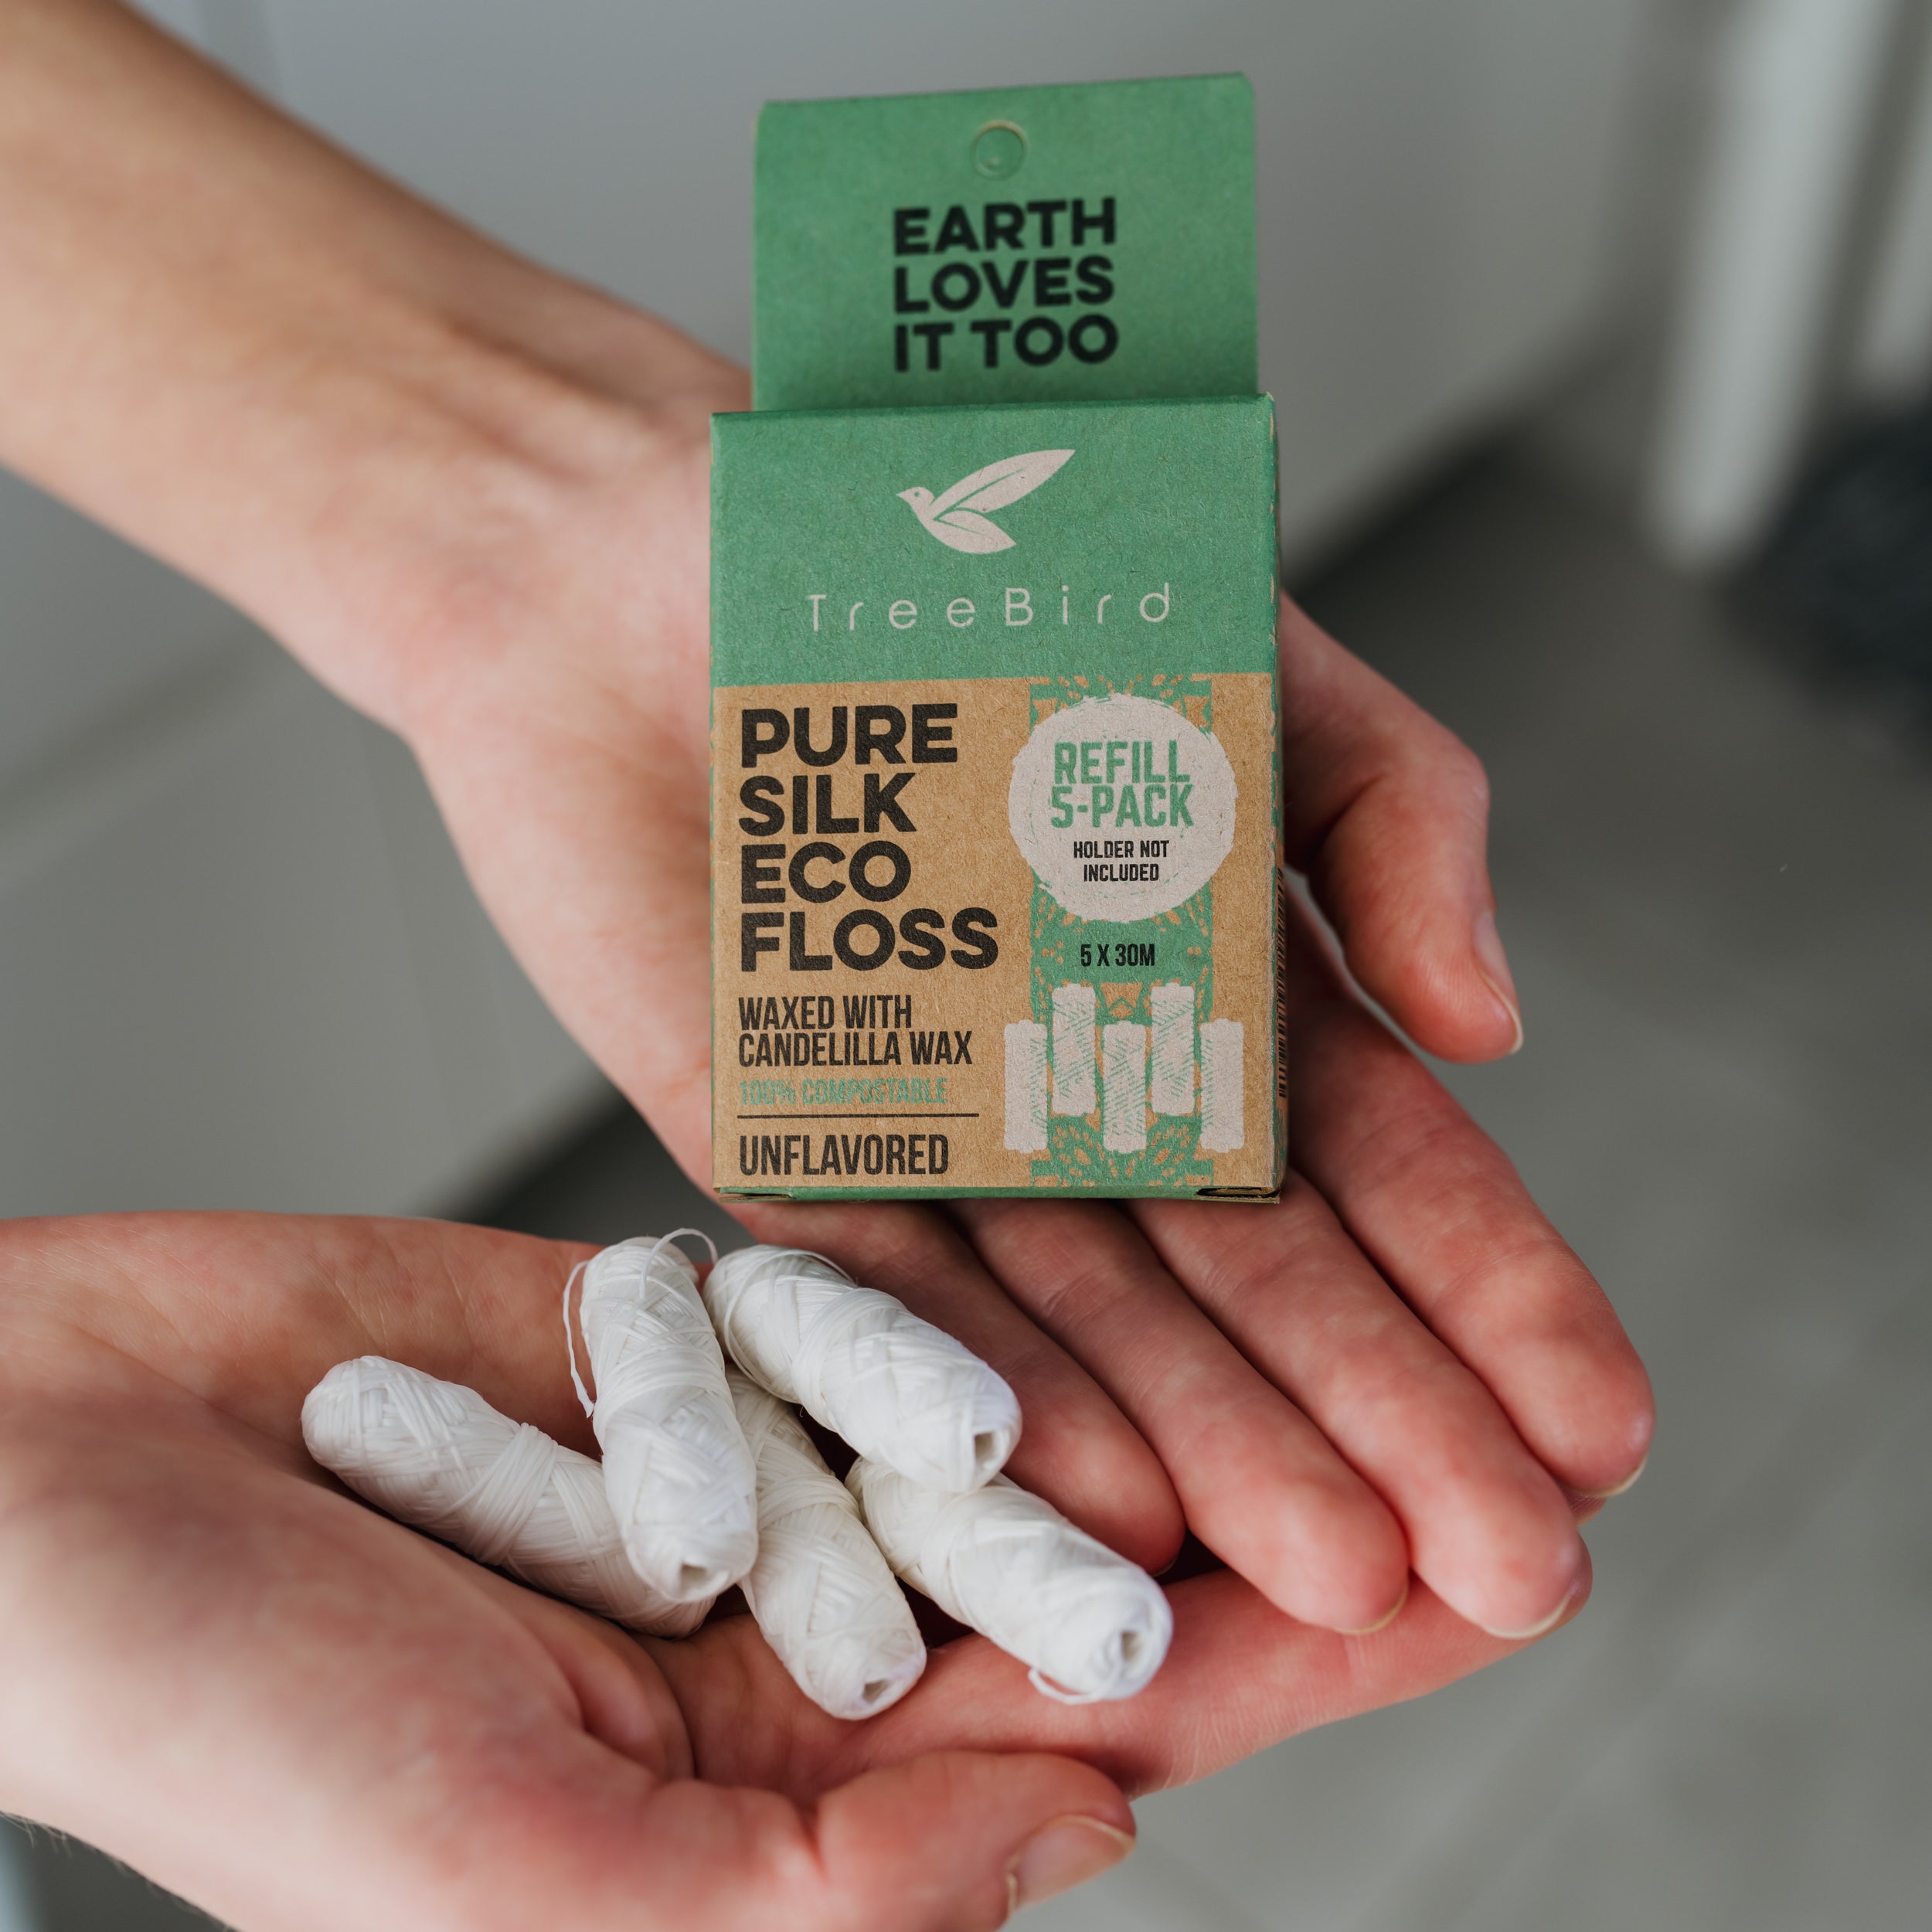 Unflavored Pure Silk Eco Floss Refills 5-Pack